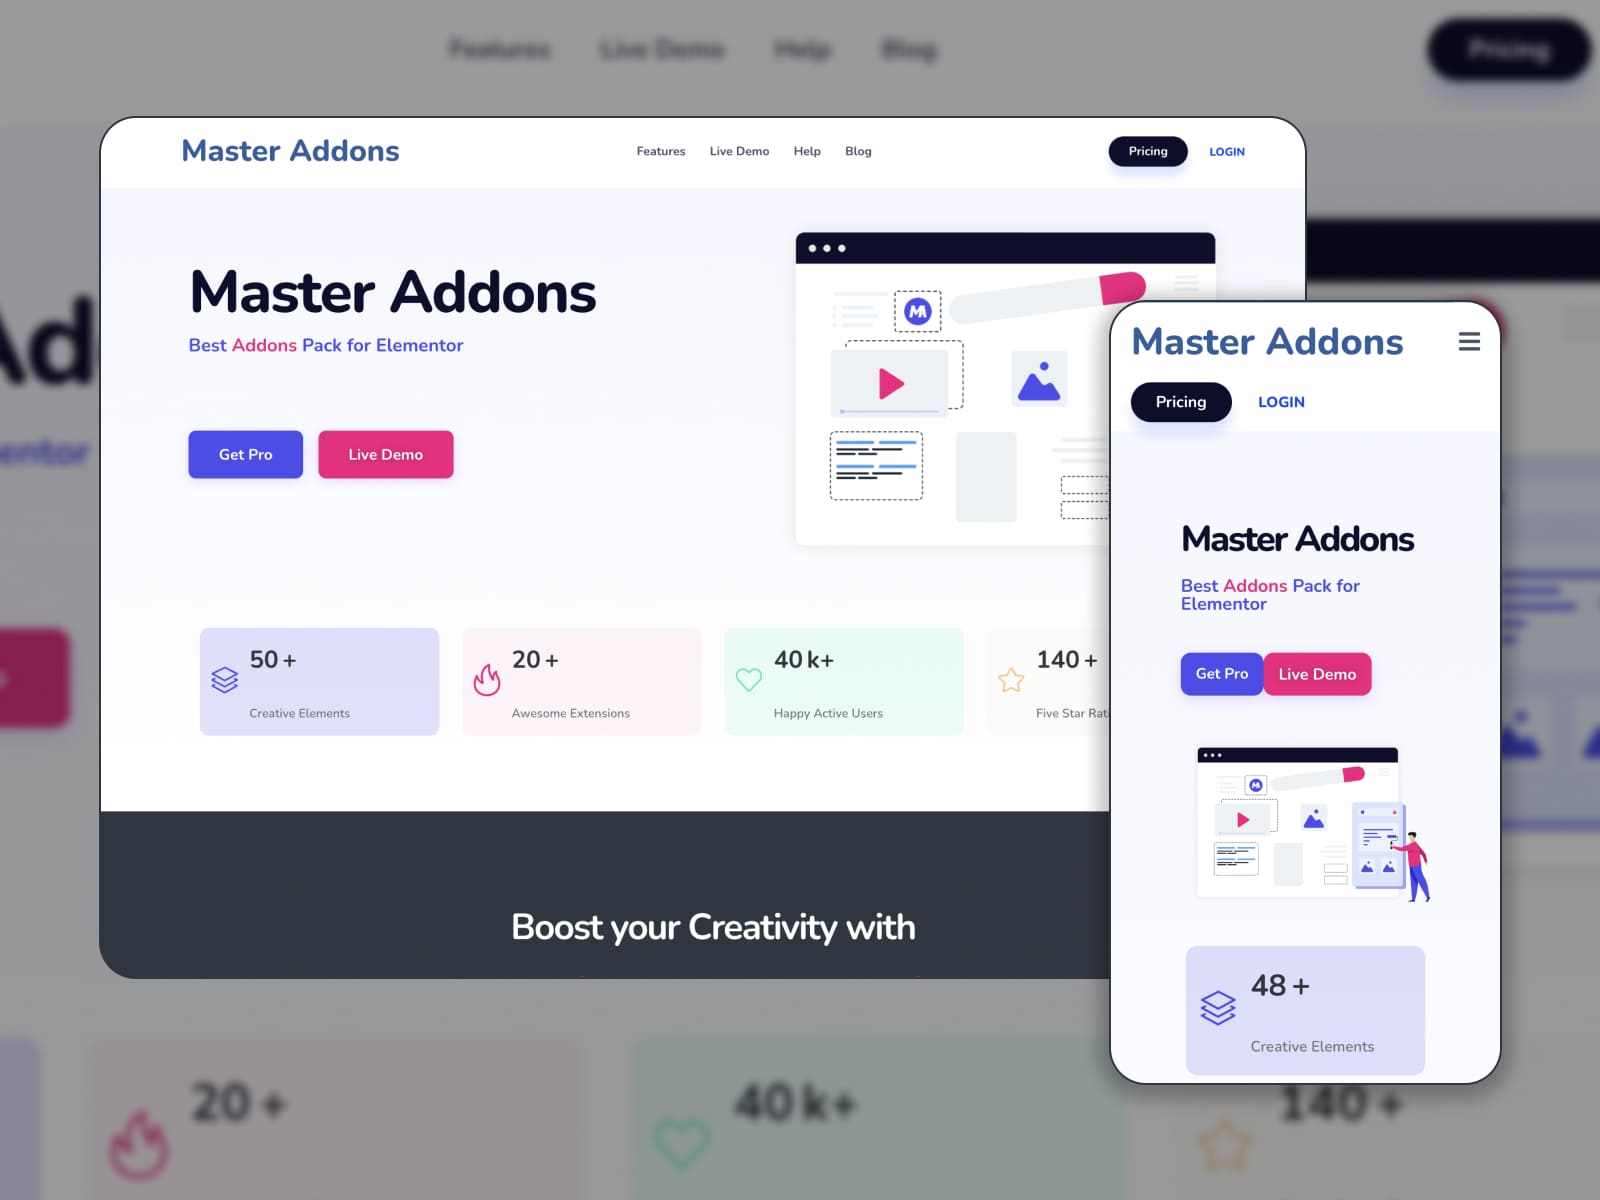 The landing page of the Master Addons extension you can download for free.